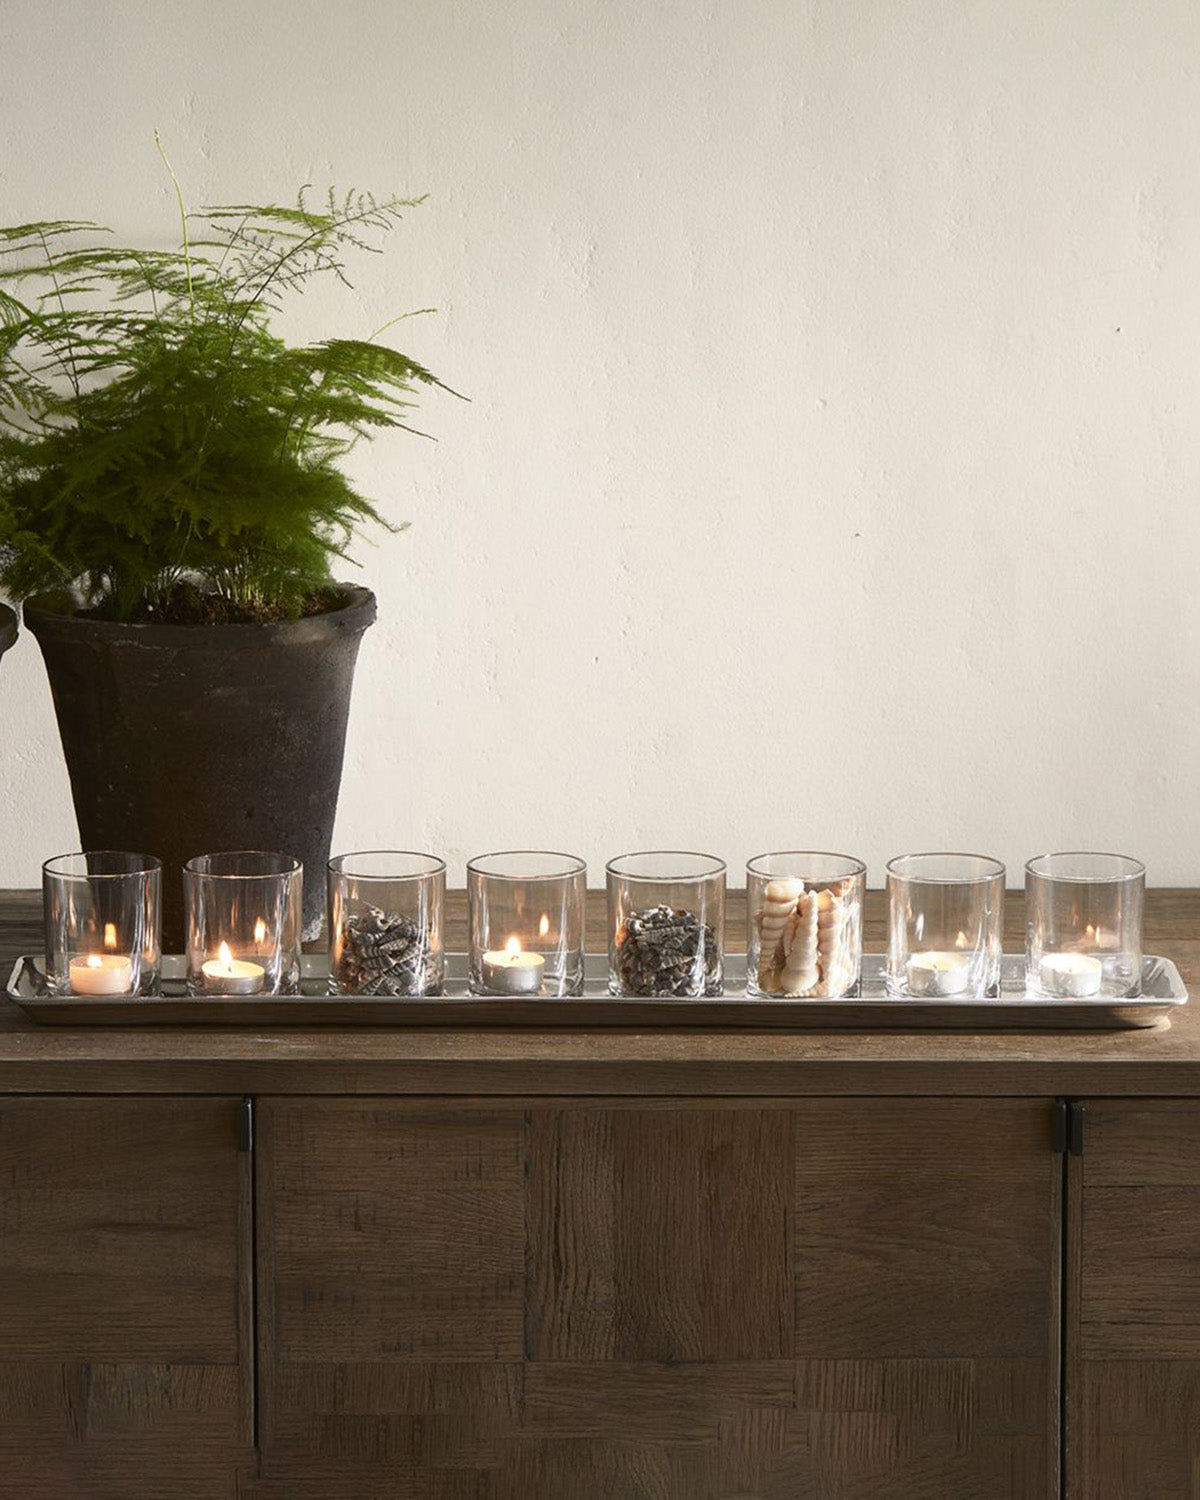 TRAY SILVER, eight tea light glasses on a shiny aluminum tray, on a wooden sideboard